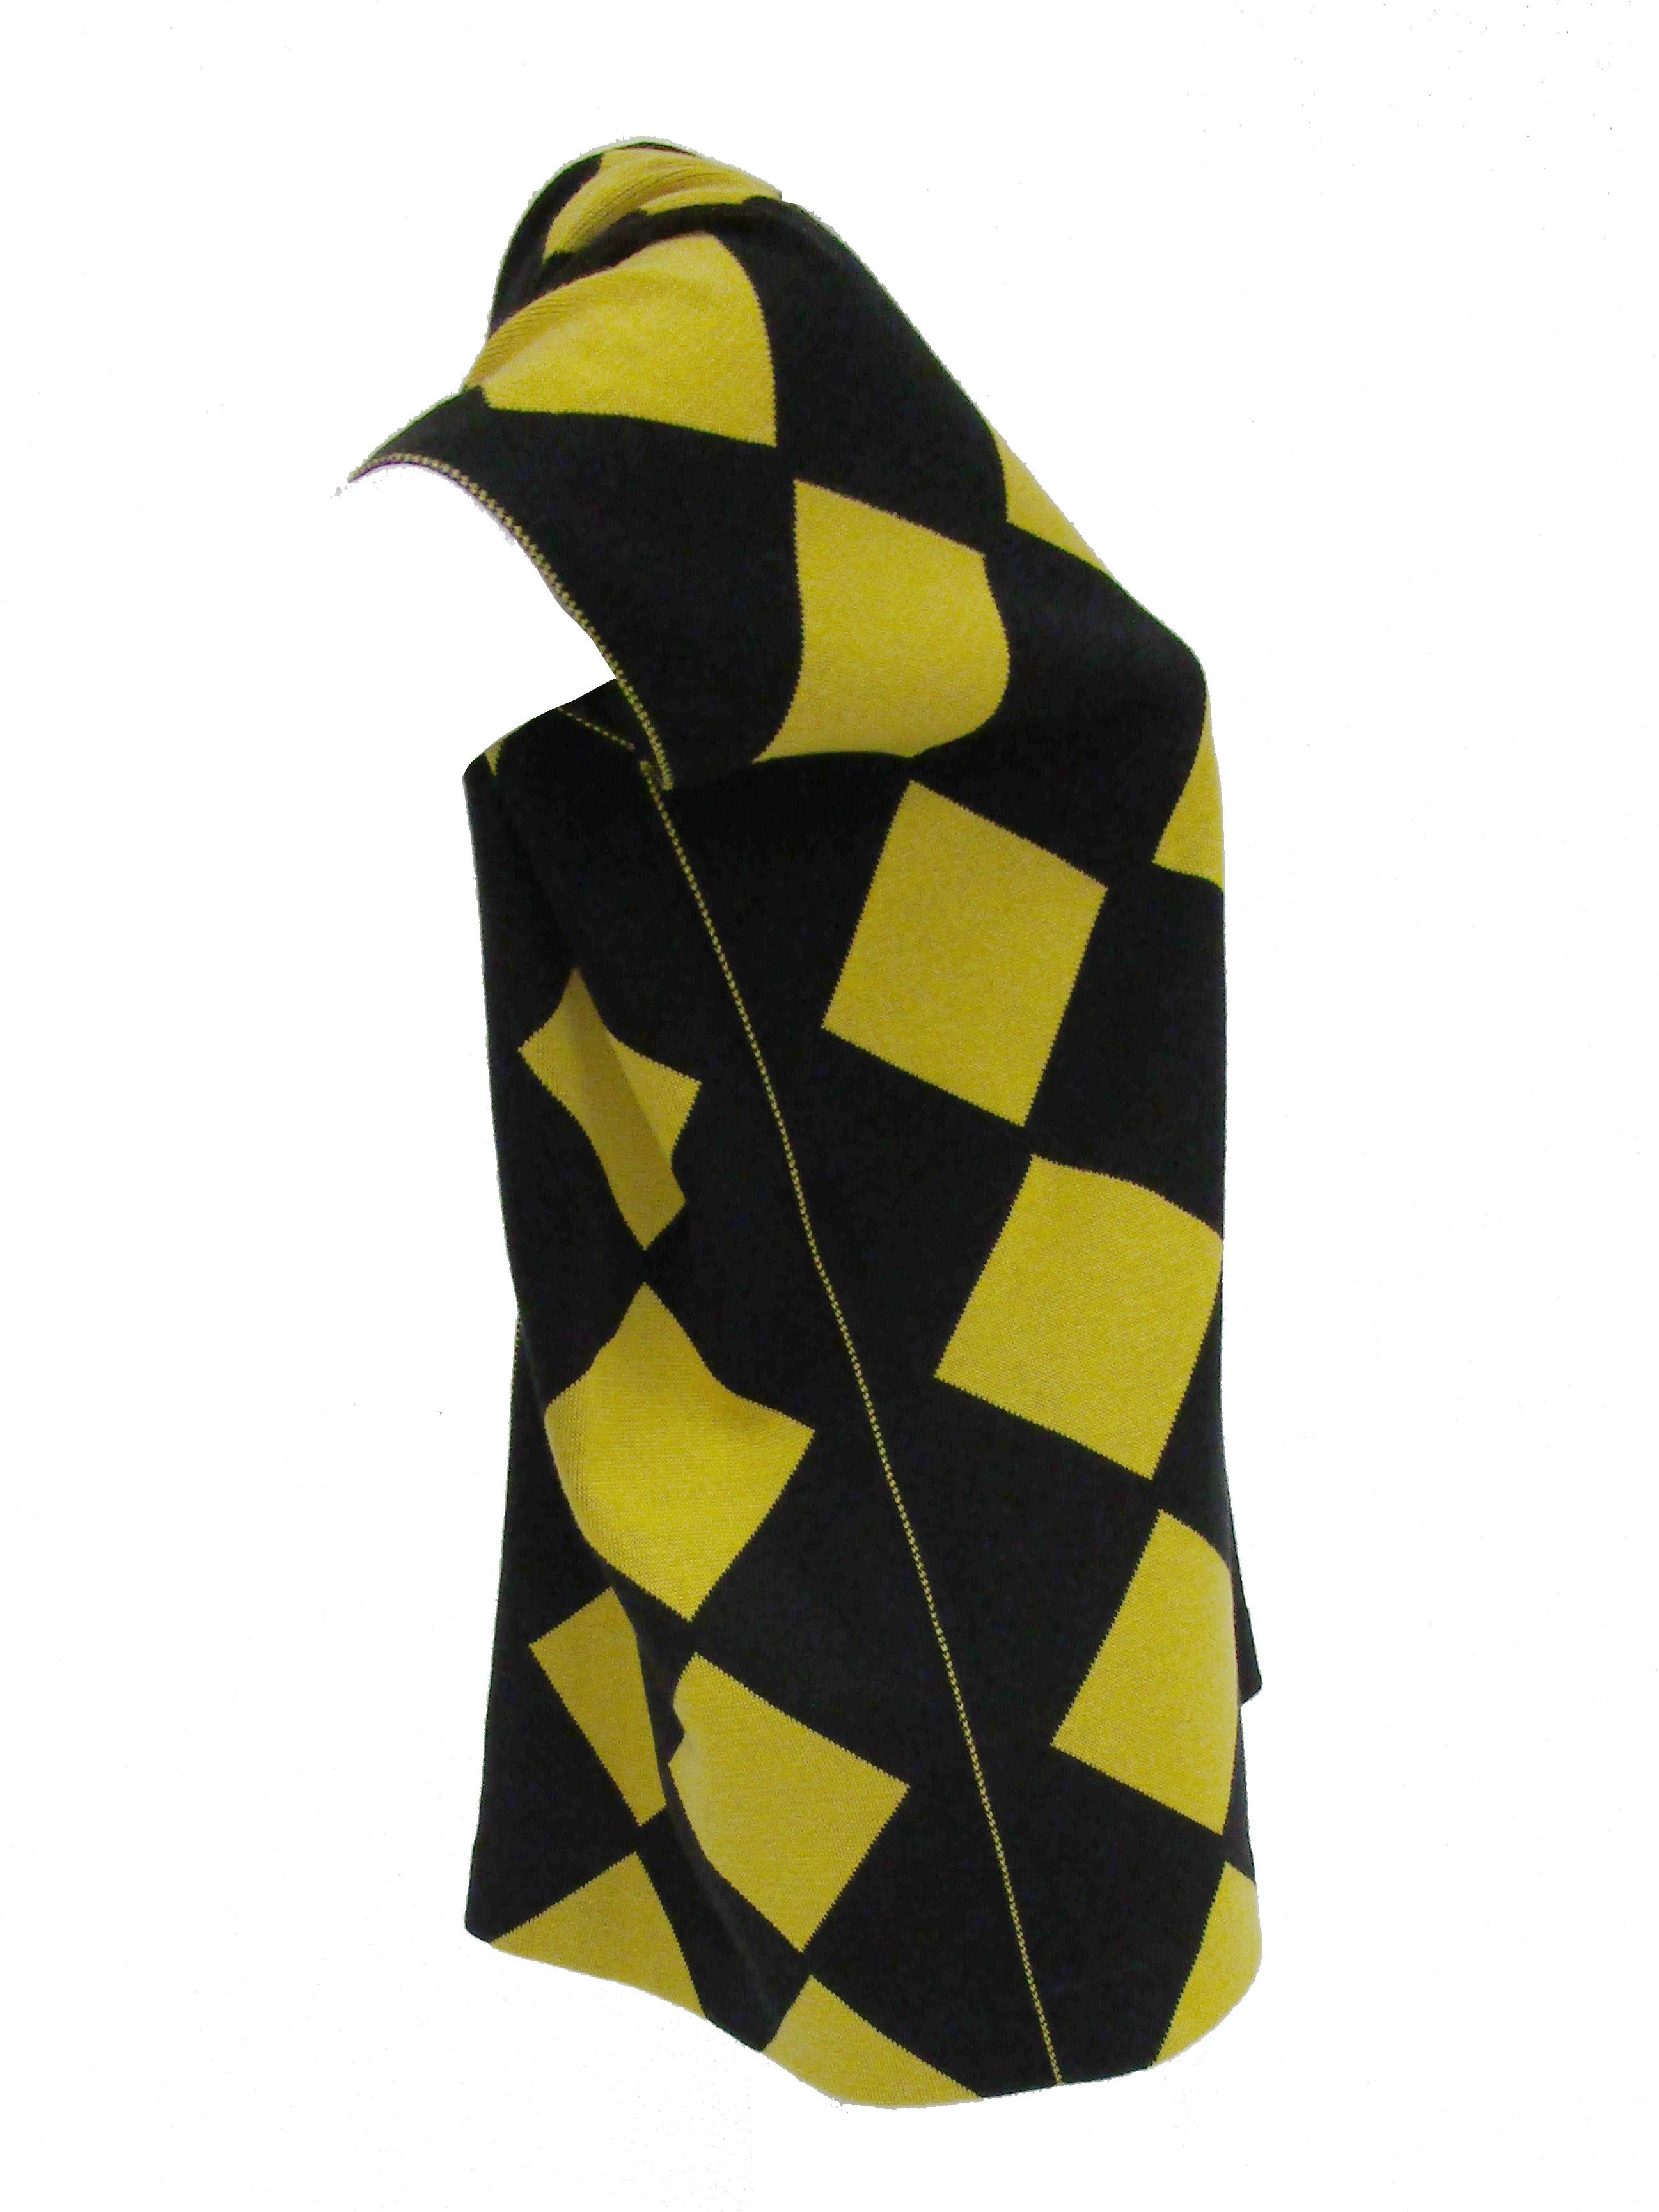 1980s Issey Miyake Yellow and Black Diamond and Stripe Cotton Knit Top For Sale 1